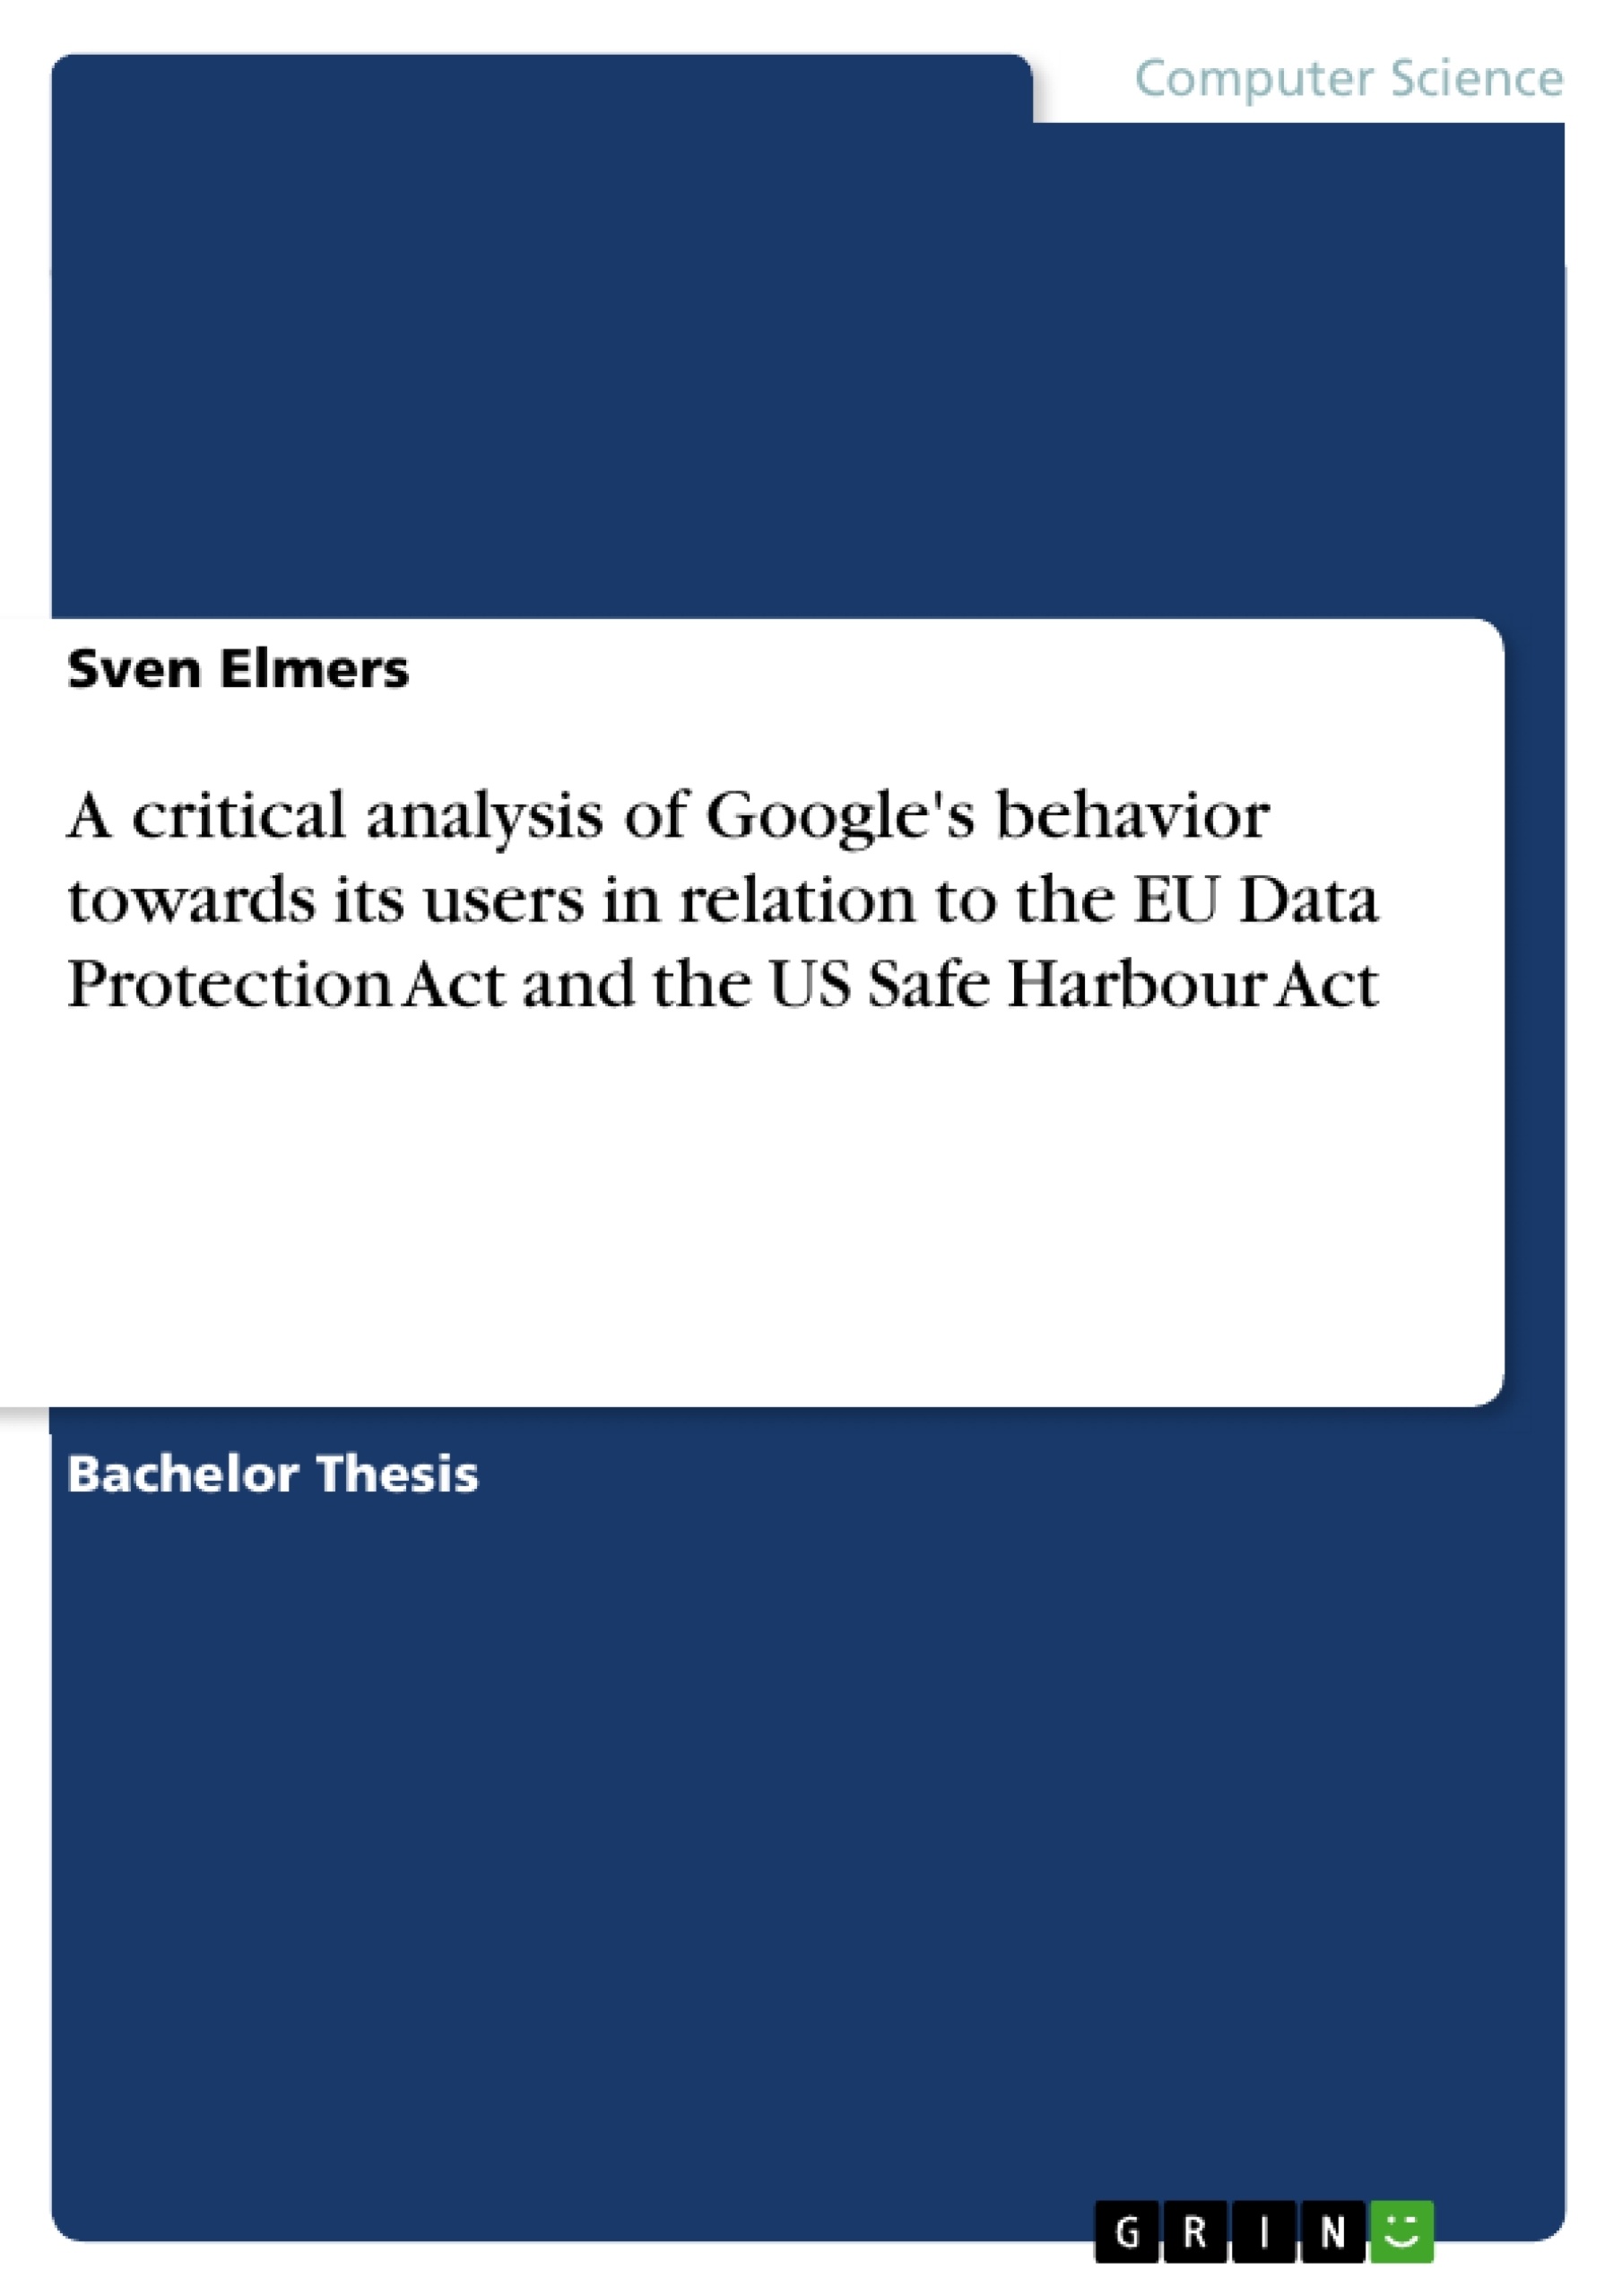 Titel: A critical analysis of Google's behavior towards its users in relation to the EU Data Protection Act and the US Safe Harbour Act